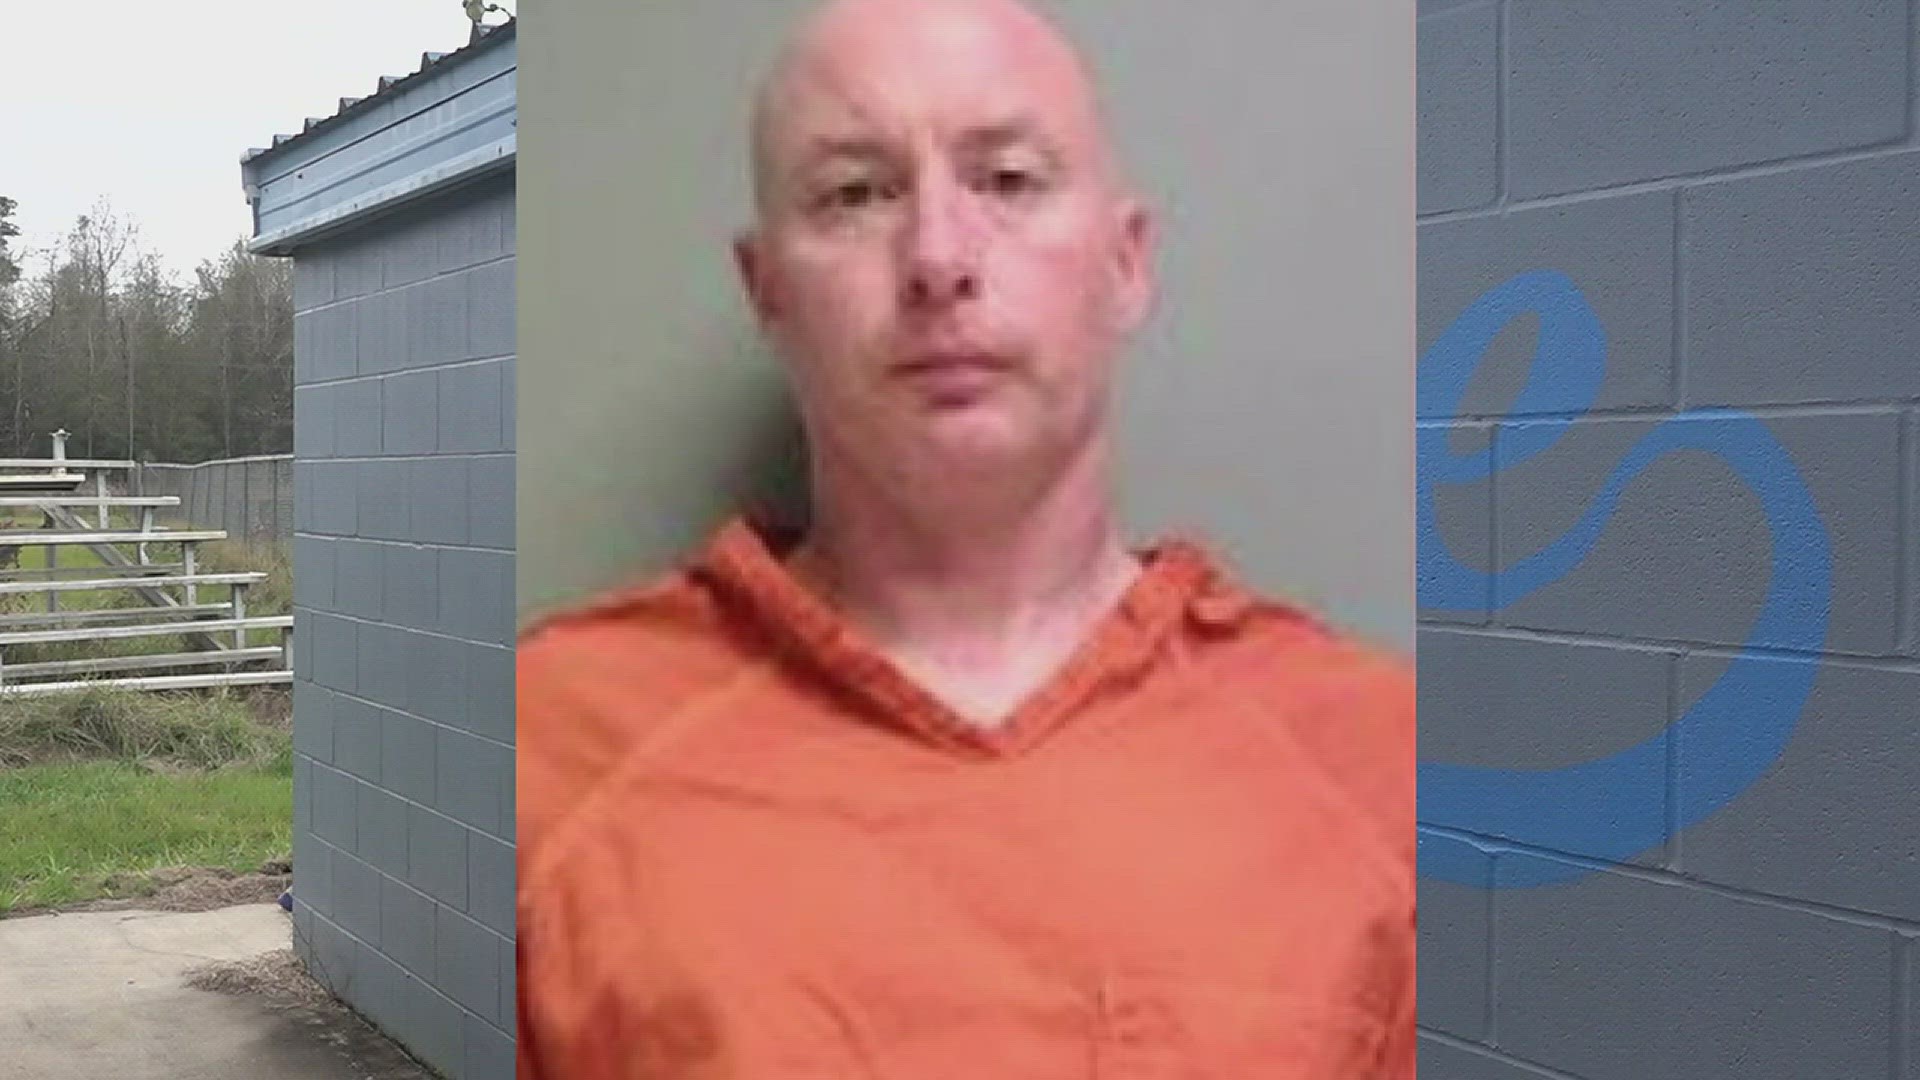 Adam Isaacks, 40, will serve between 35 and 40 years in prison and will have to register as a sex offender. He waived his right to an appeal.